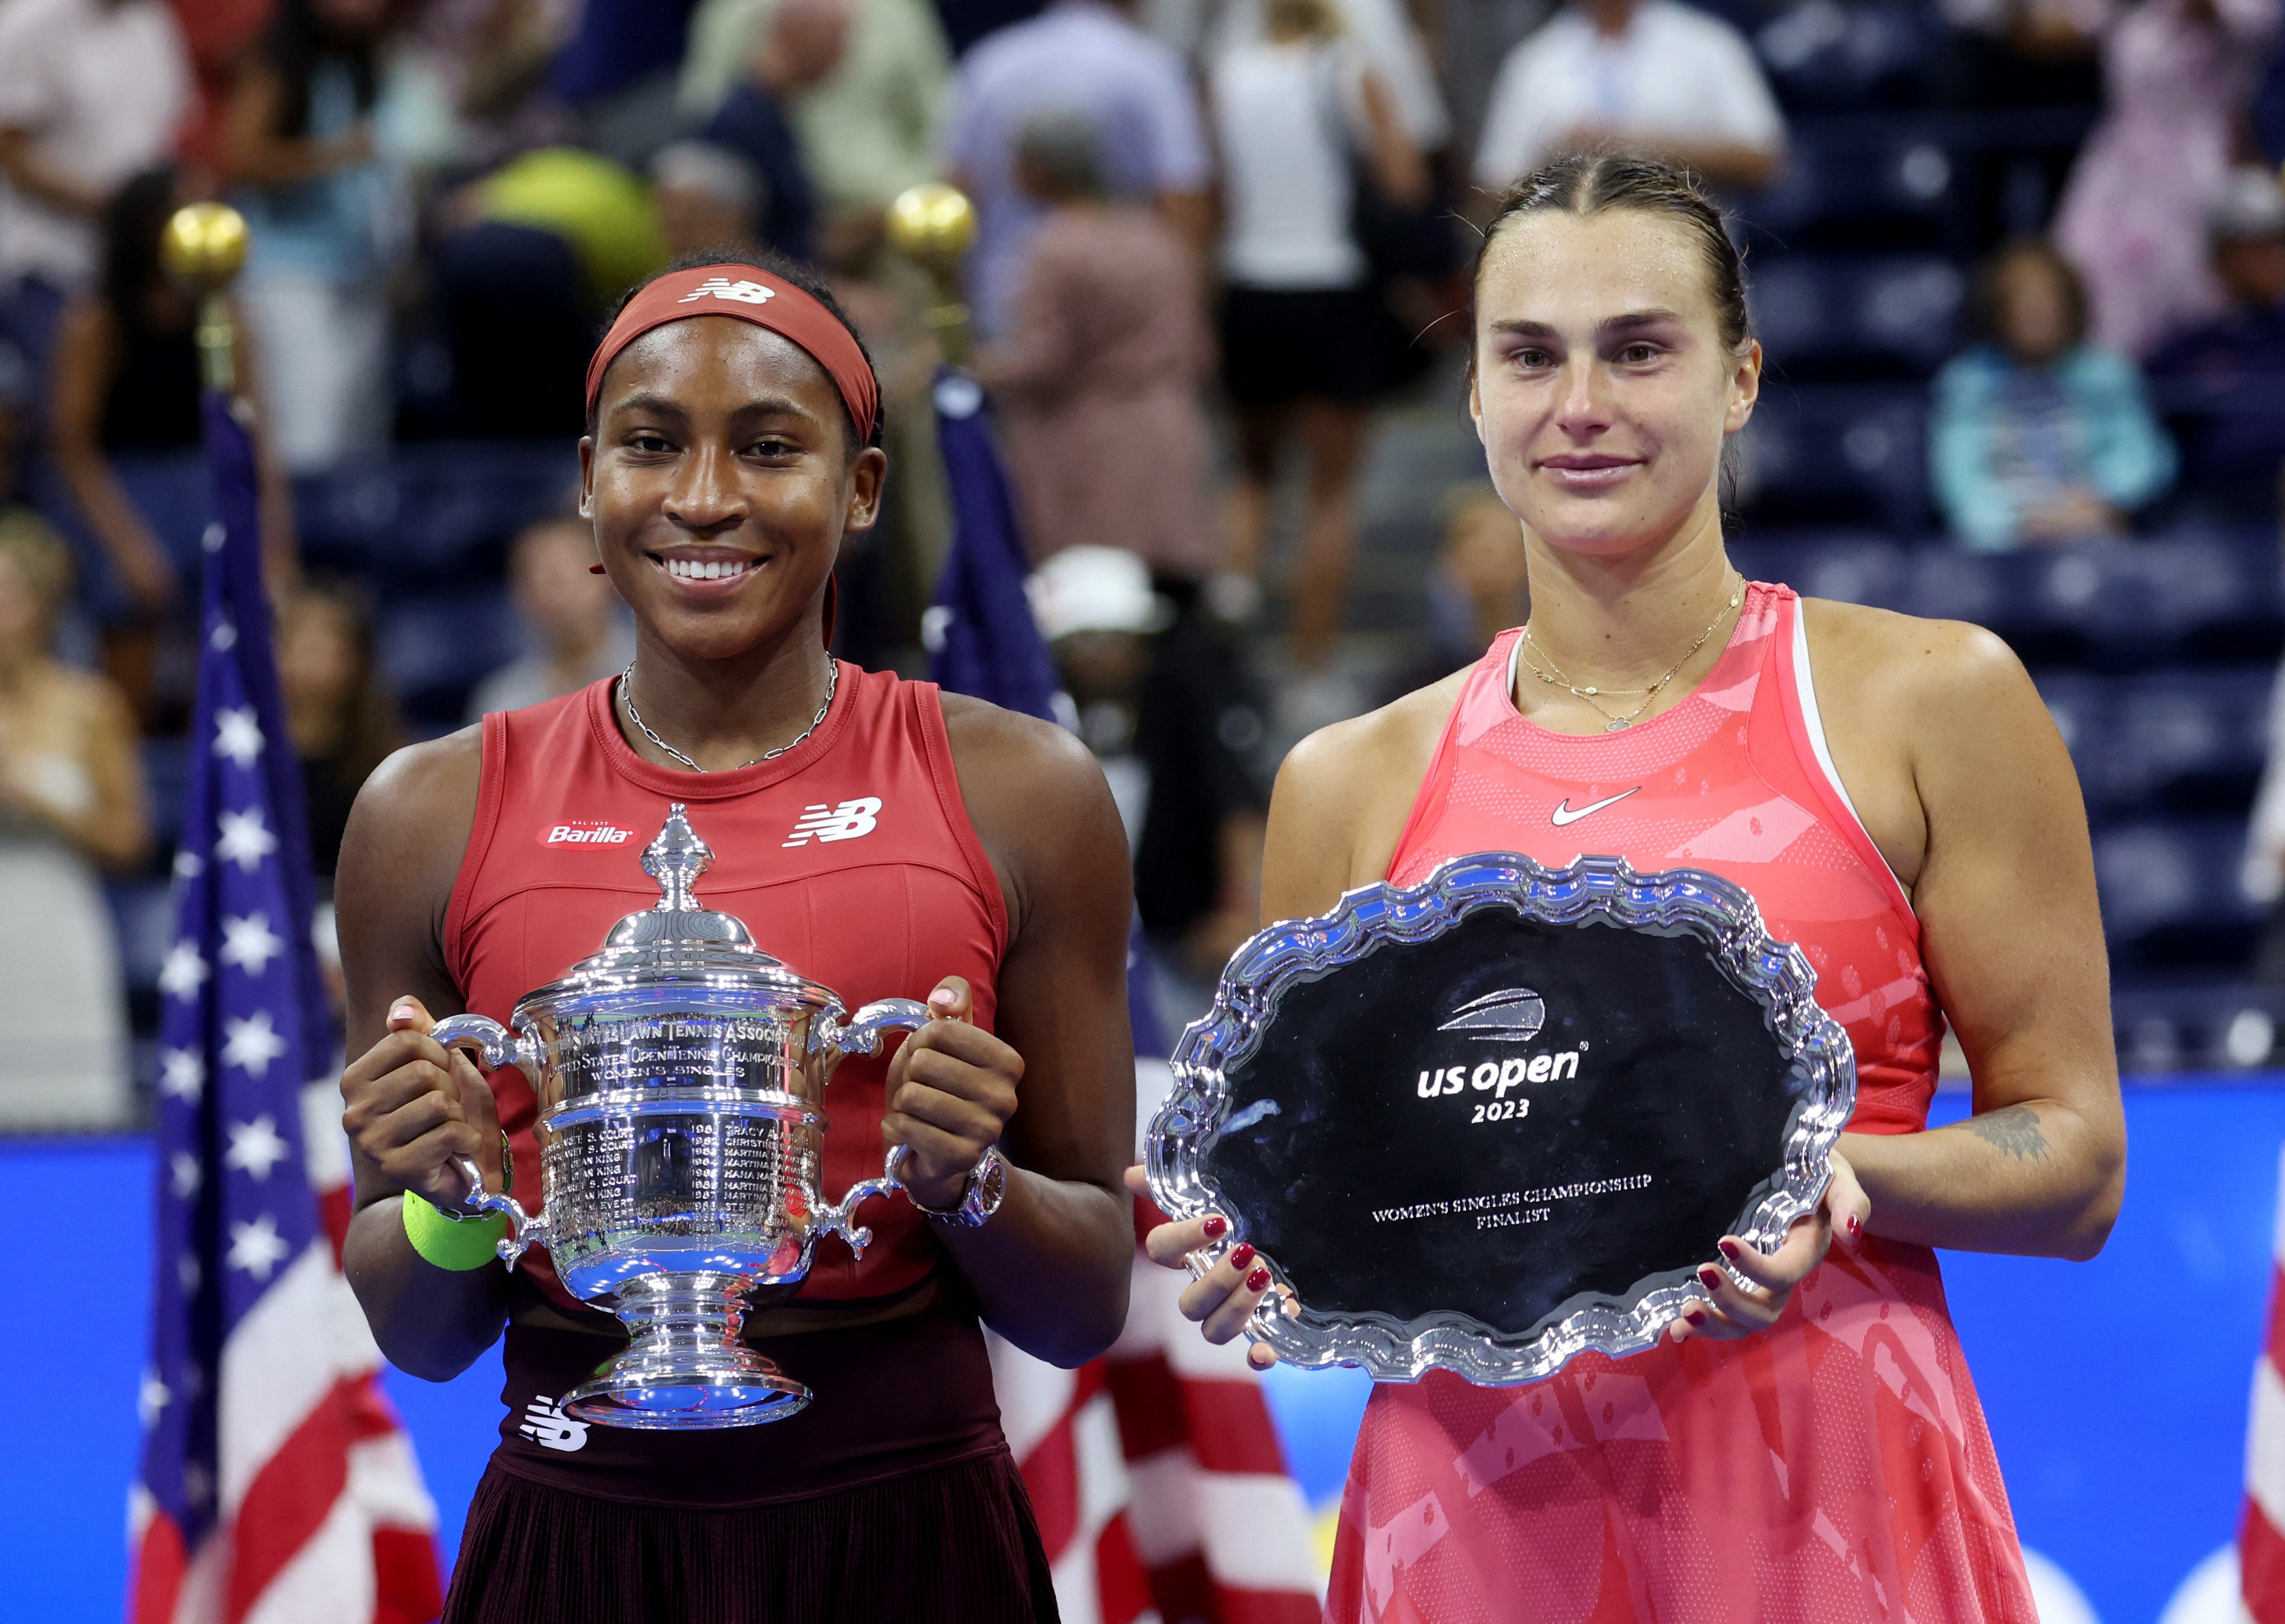 American Coco Gauff clinches first U.S. Open final appearance